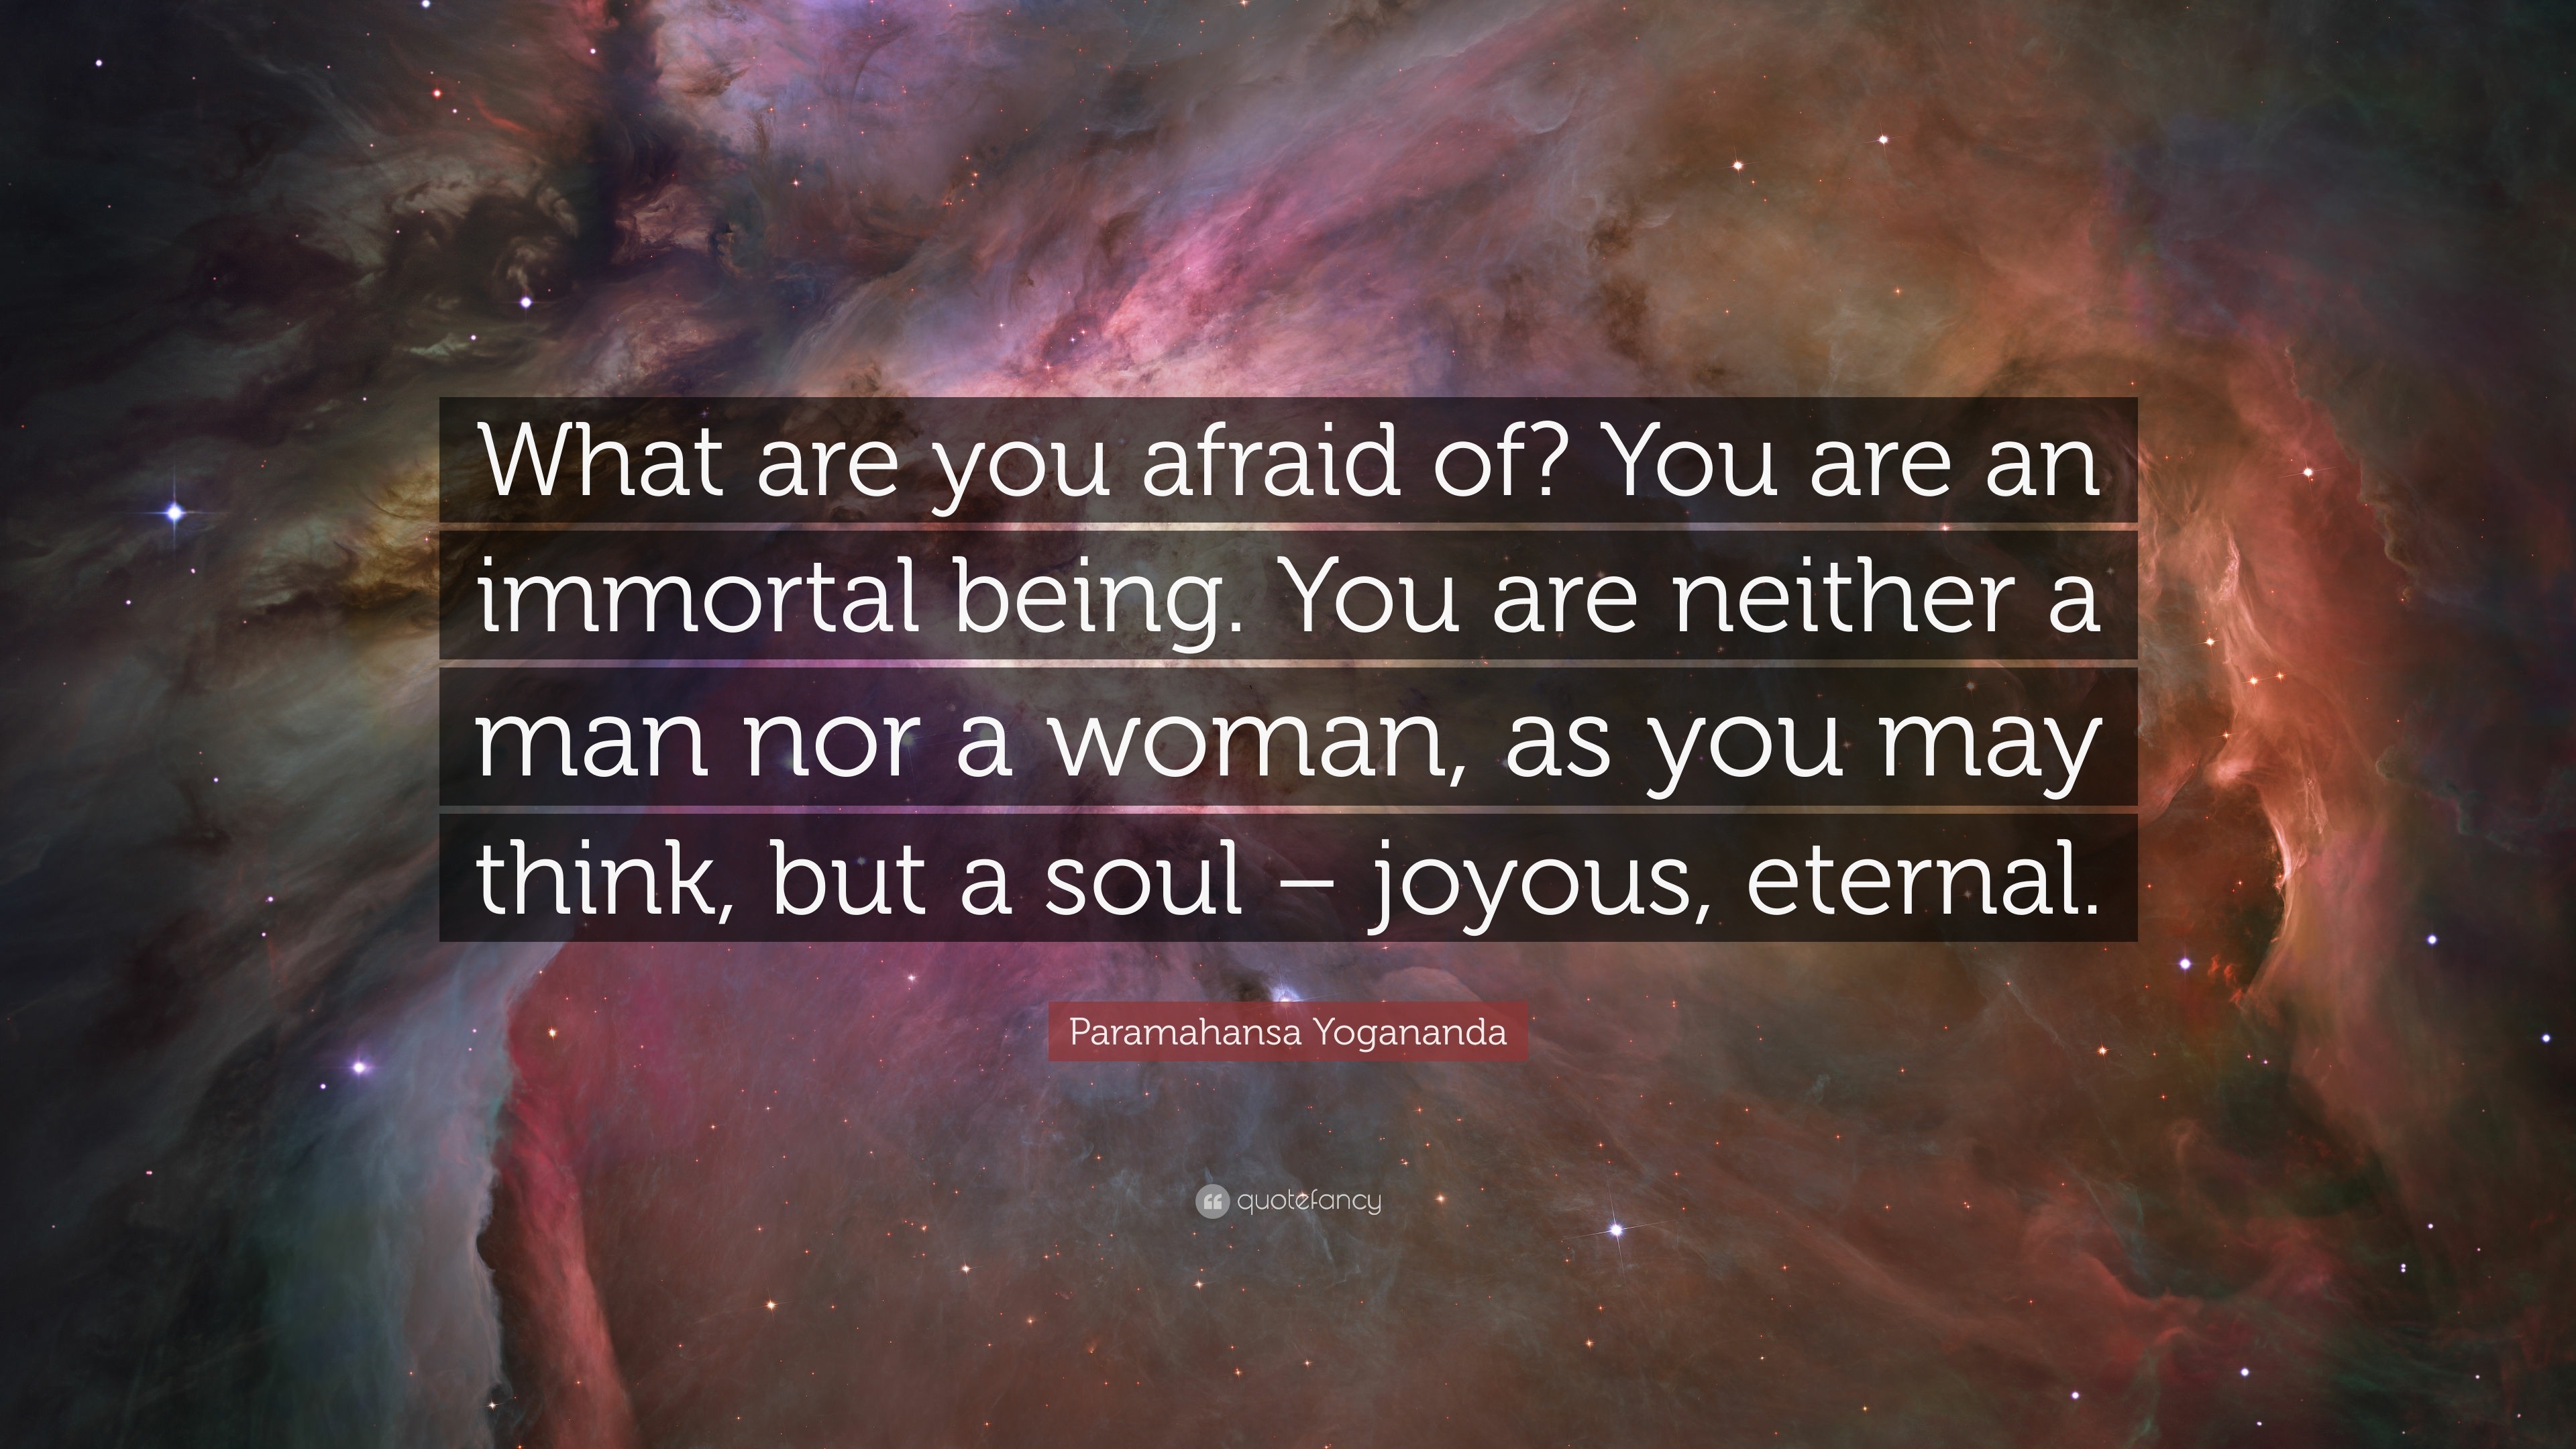 Soul Quotes “What are you afraid of You are an immortal being